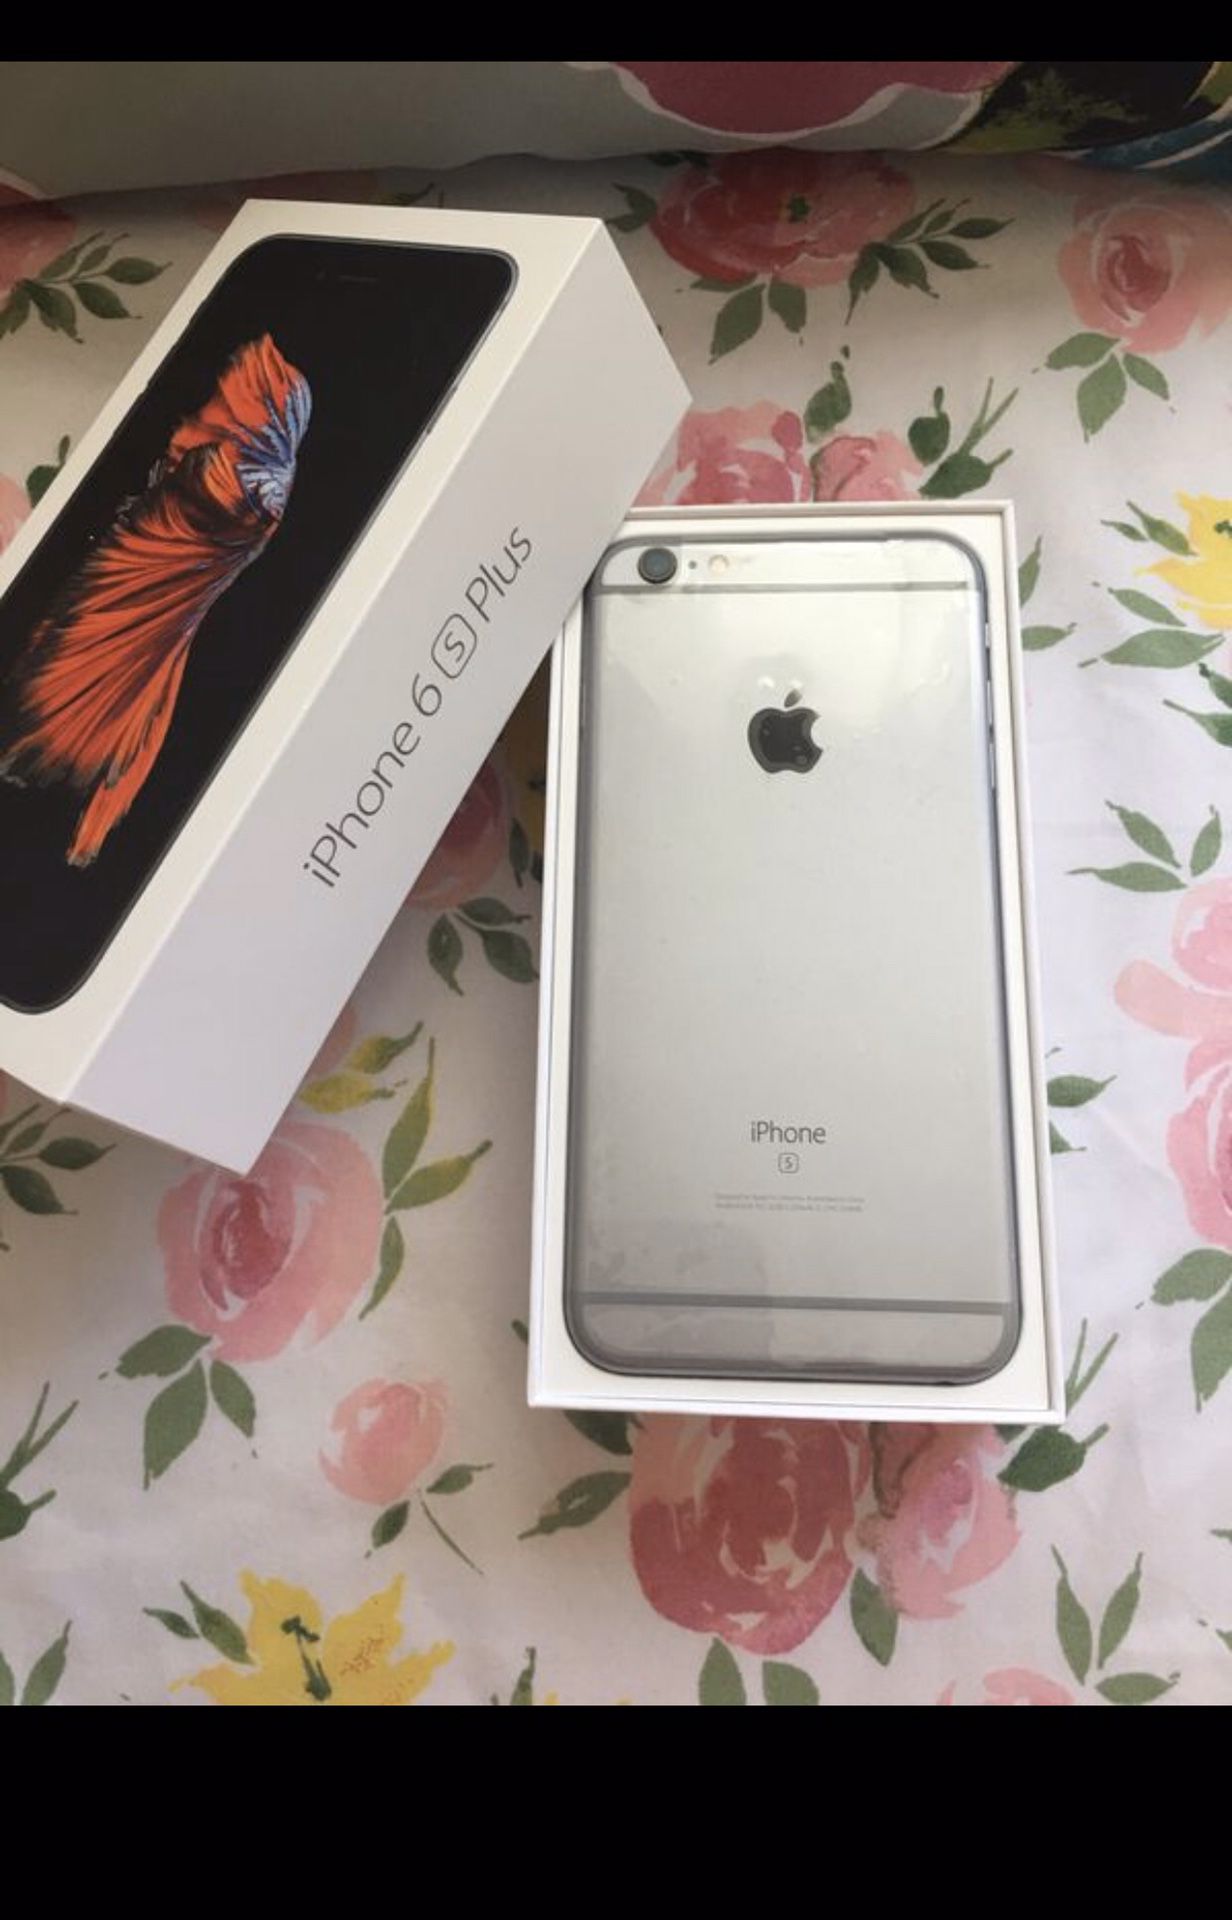 iphone 6s plus for cricket only! 35GB